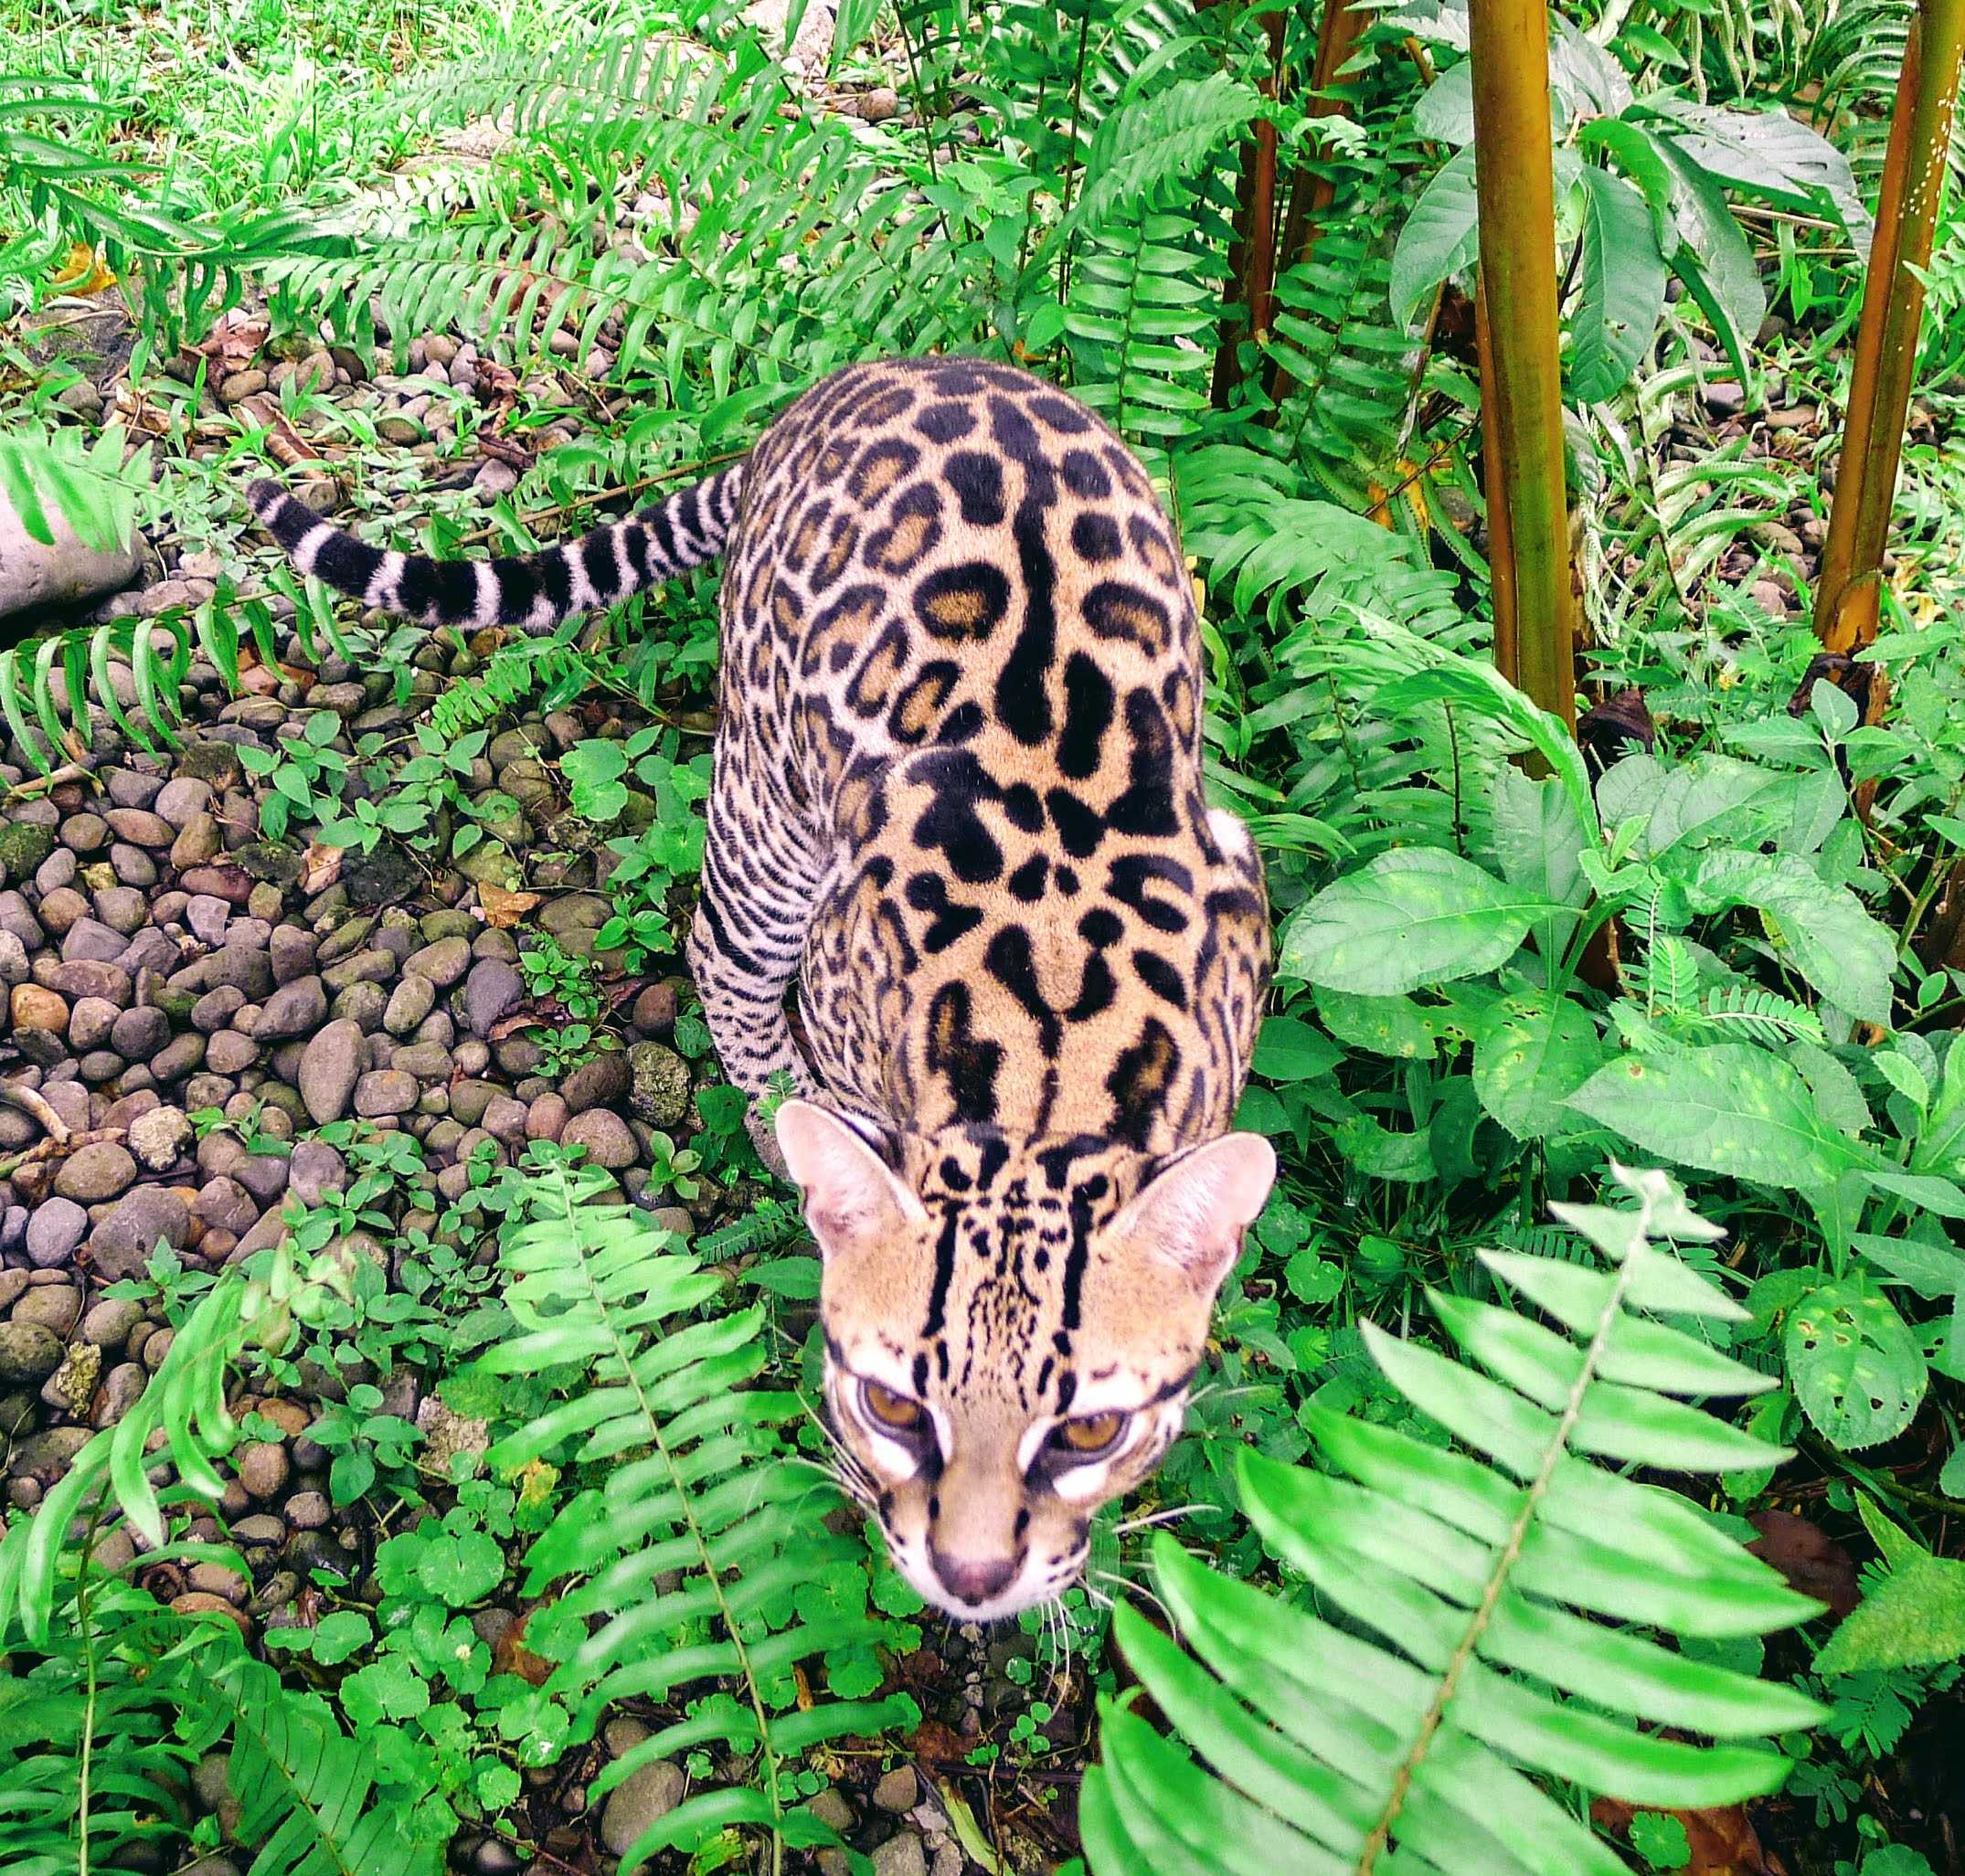 A jaguar in the jungle looking at the camera